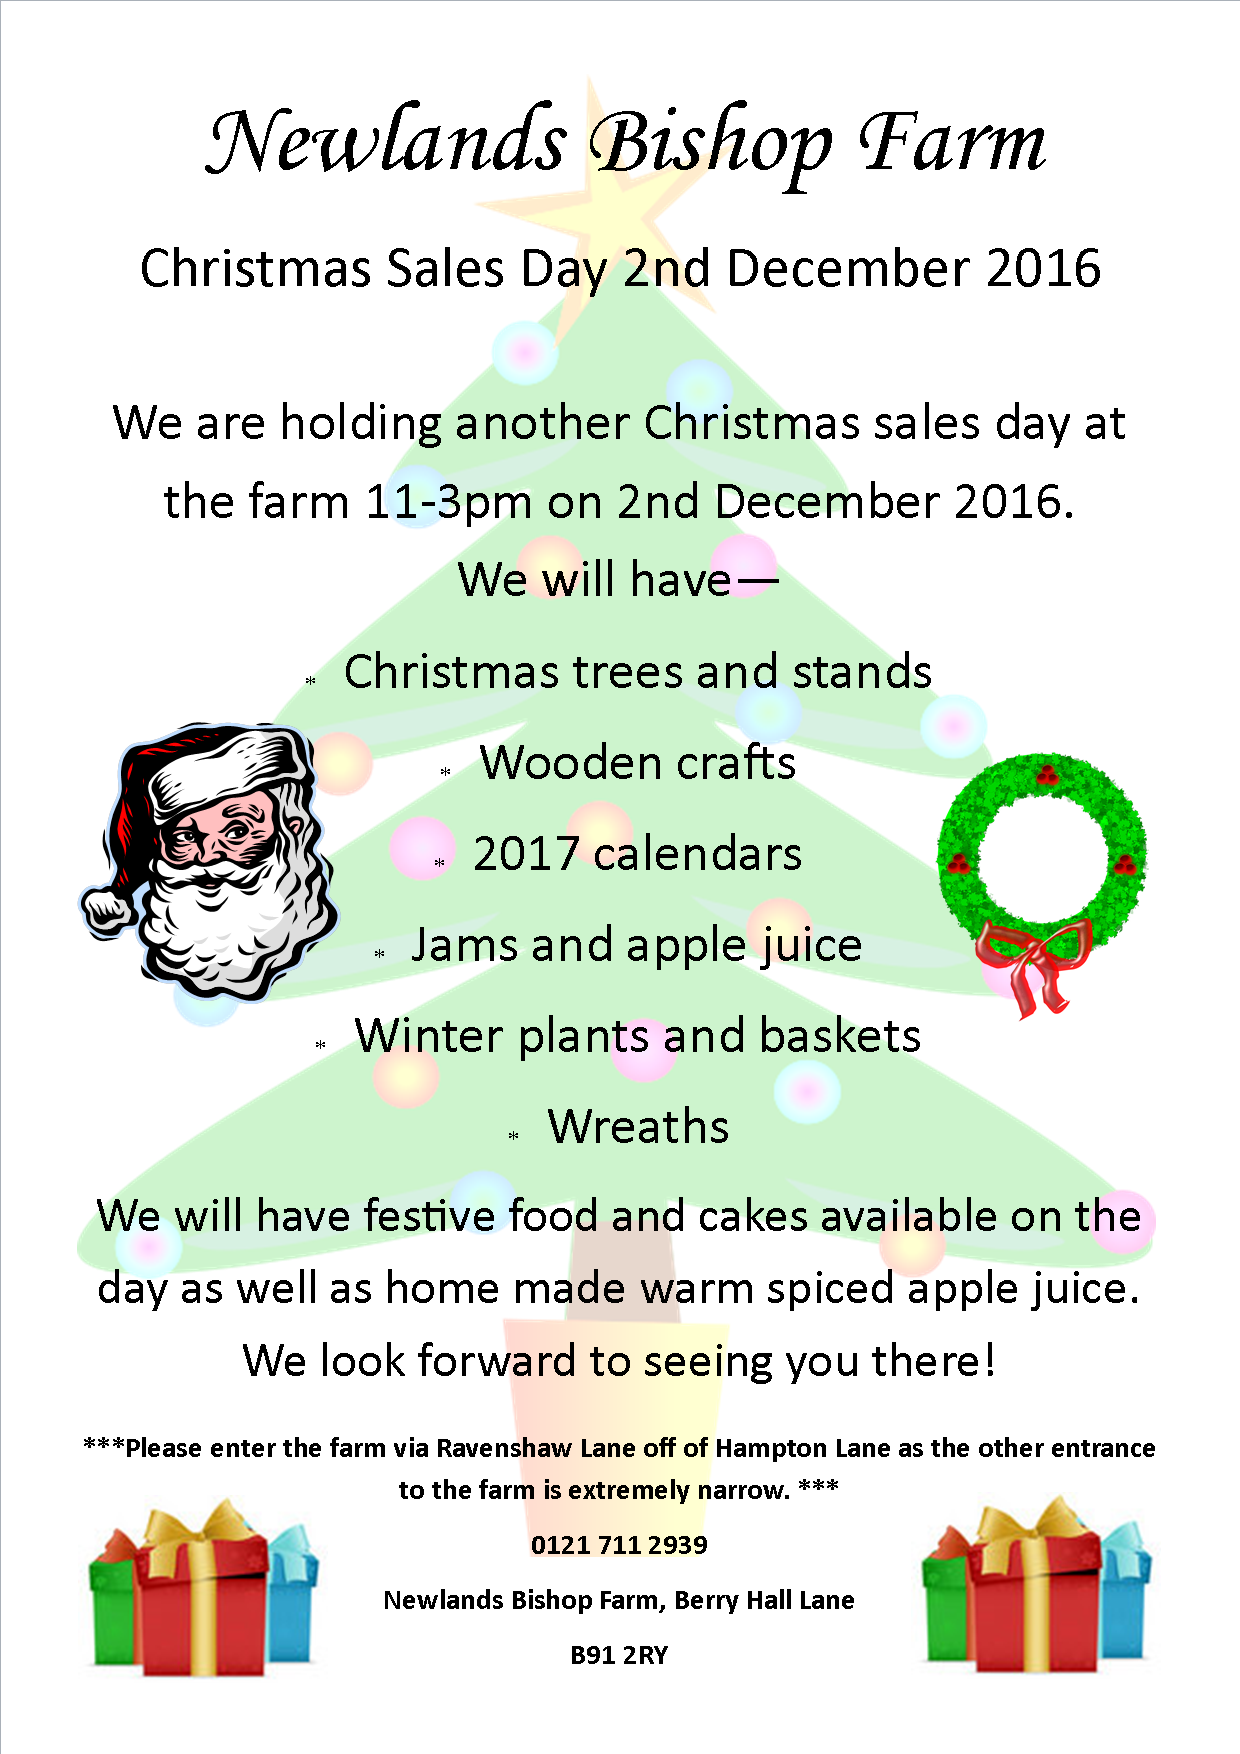 Christmas Sales Day 2nd December 11-3pm